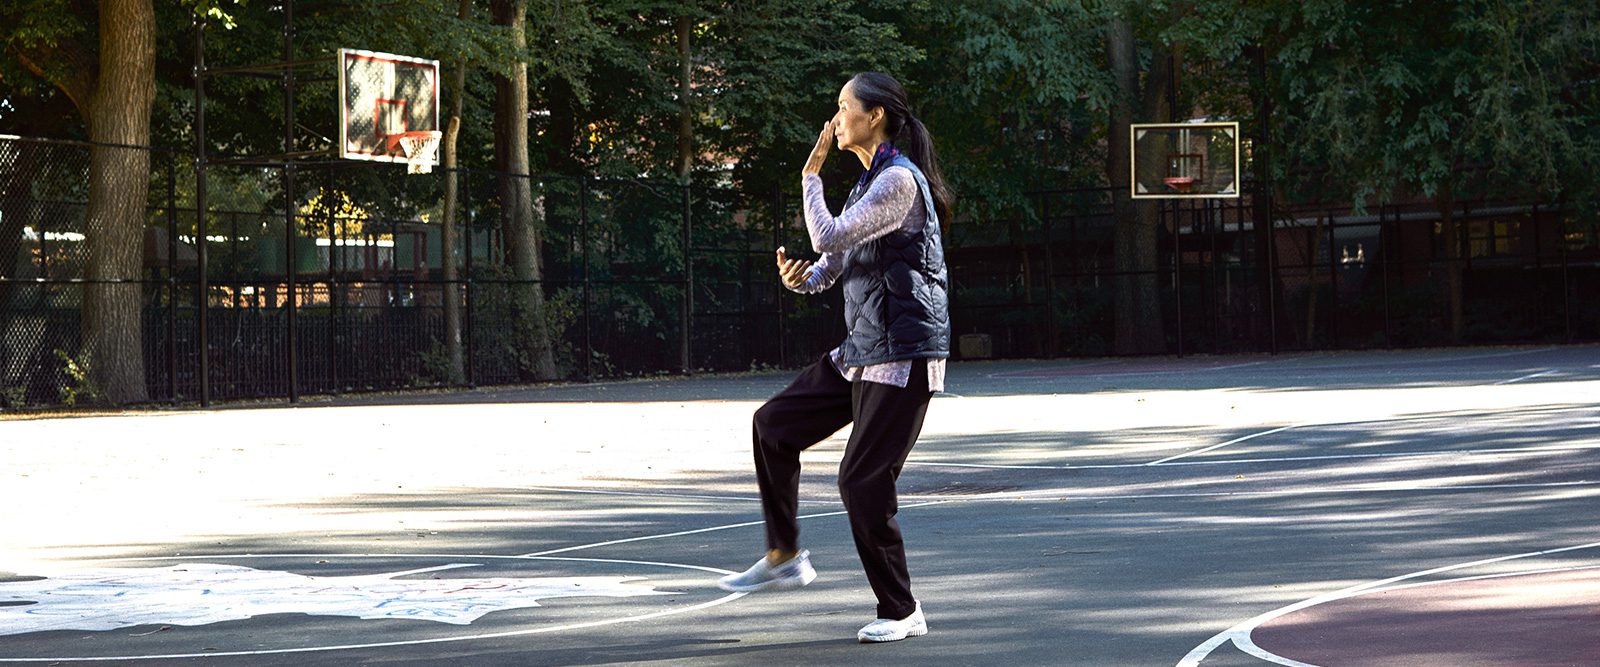 Woman doing tai chi in a park